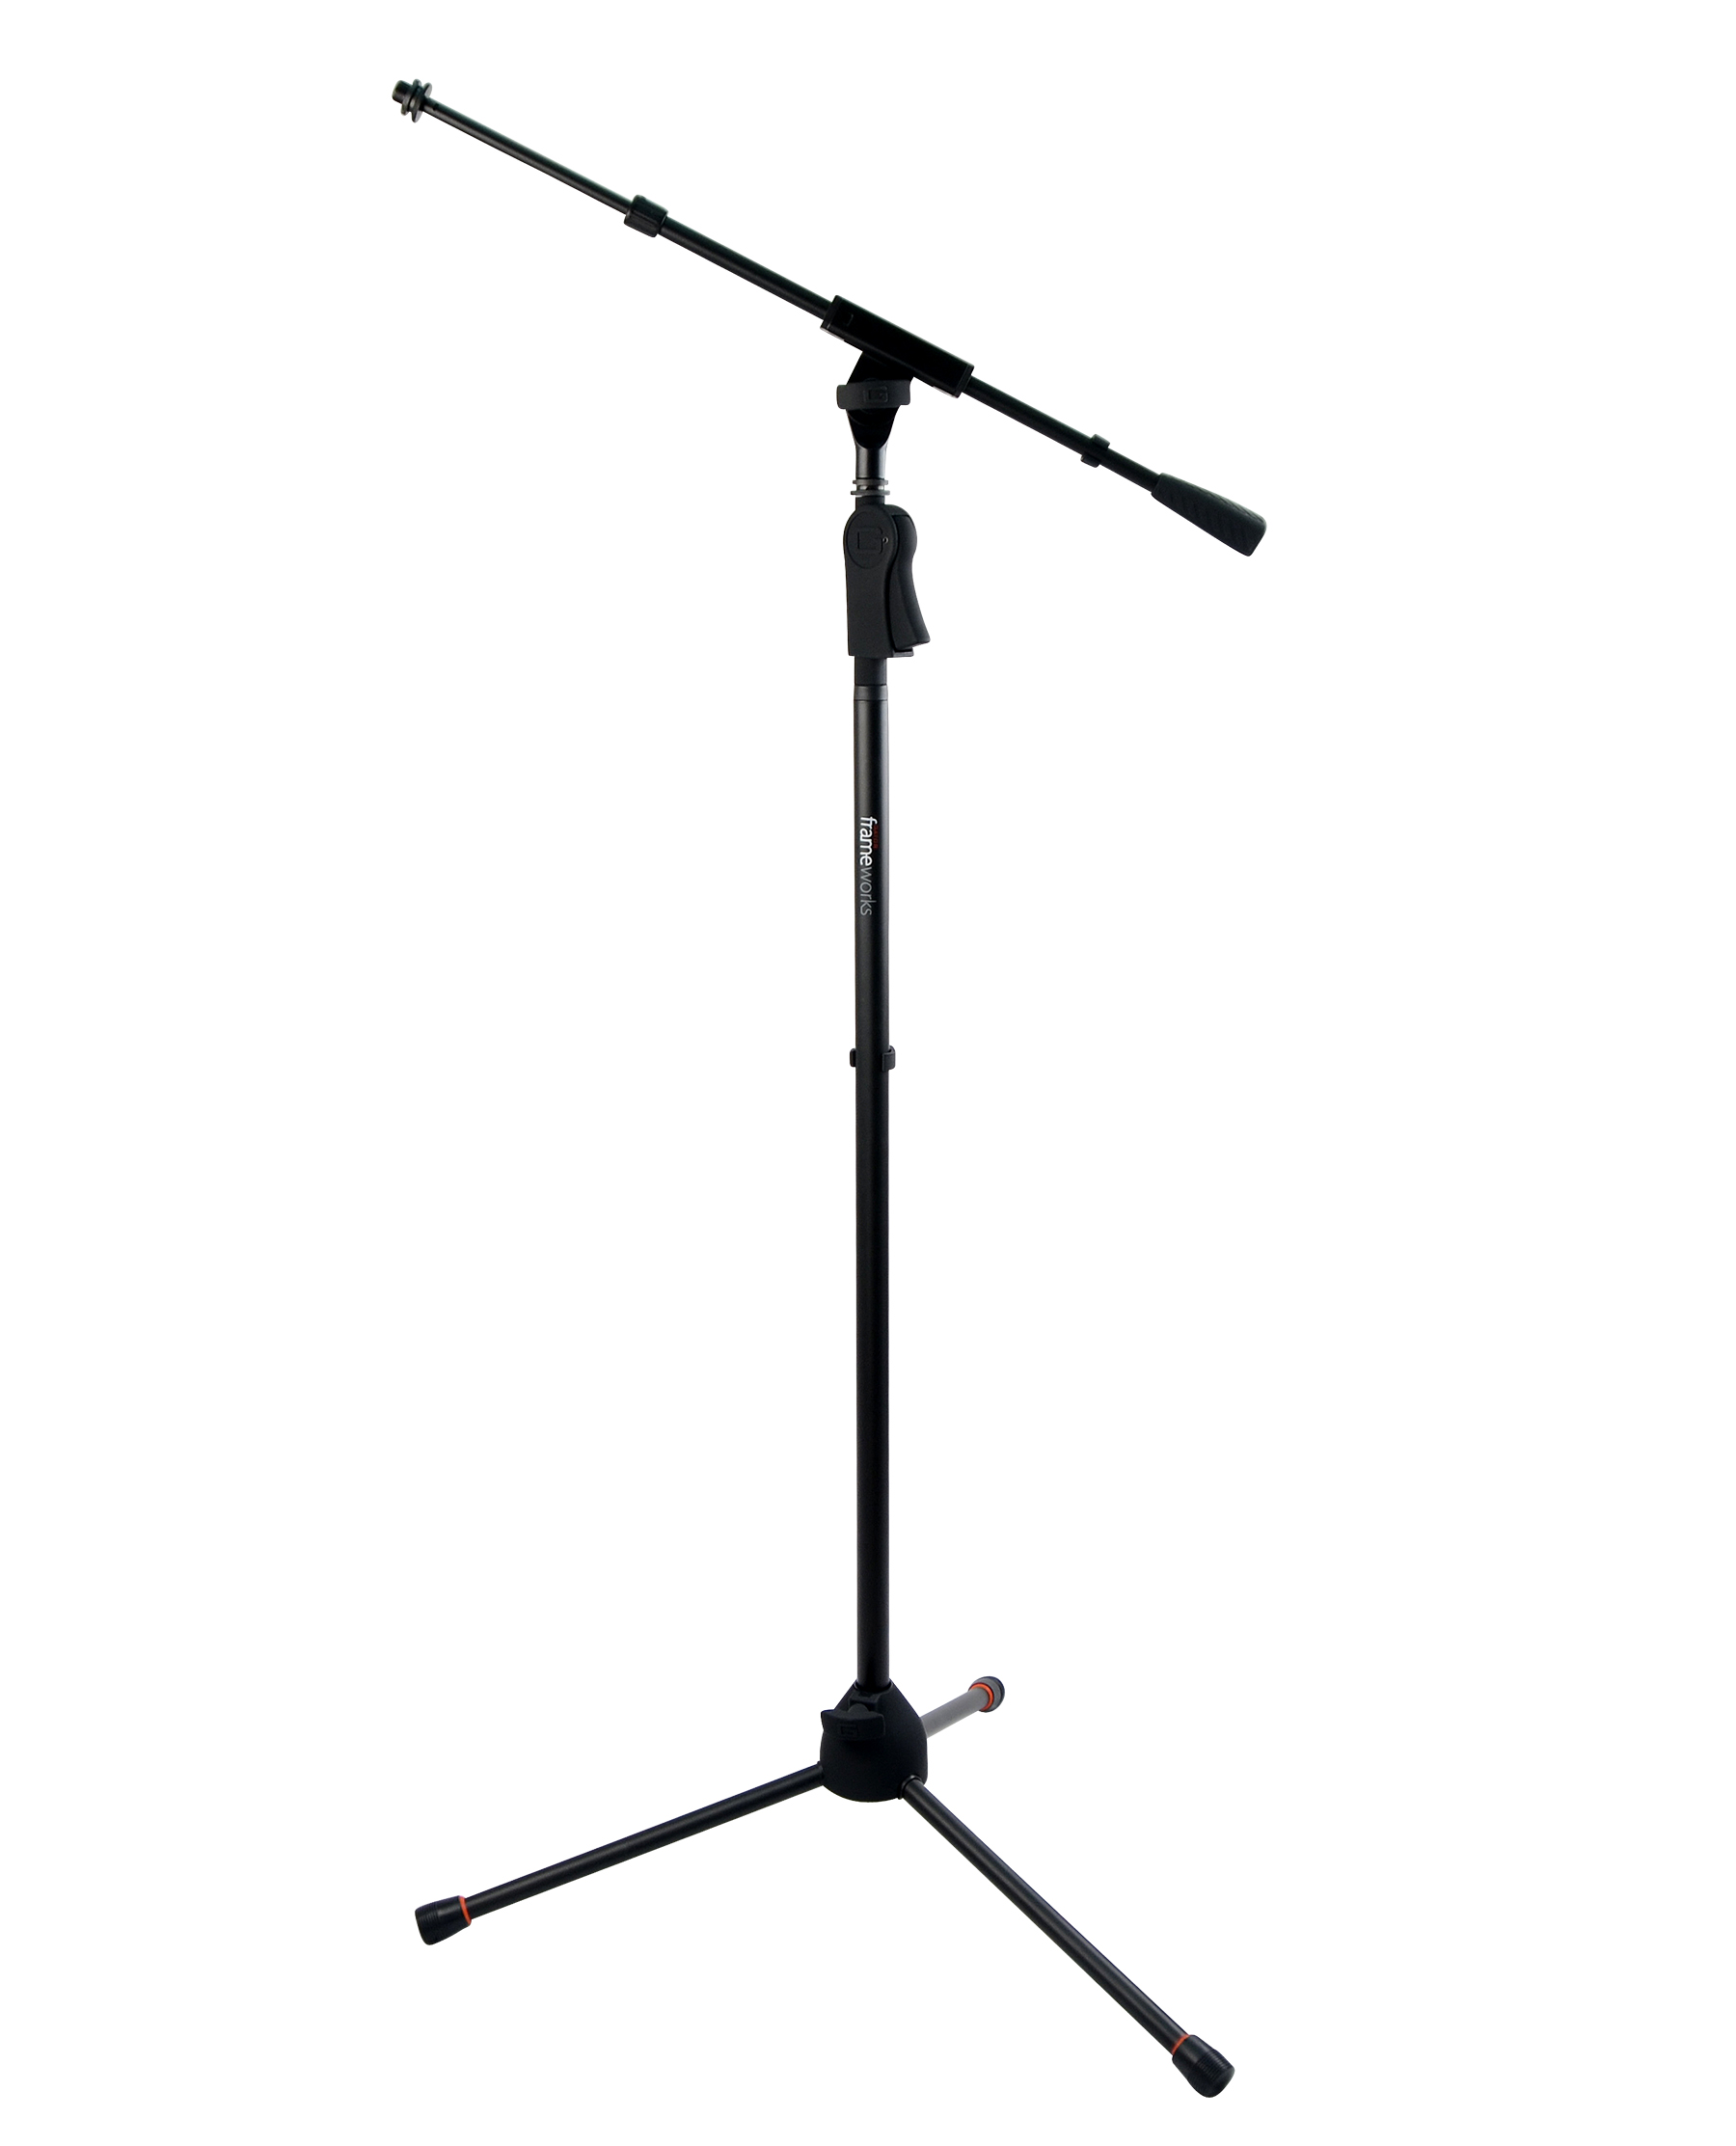 Deluxe Tripod Mic Stand with Telescoping Boom-GFW-MIC-2120